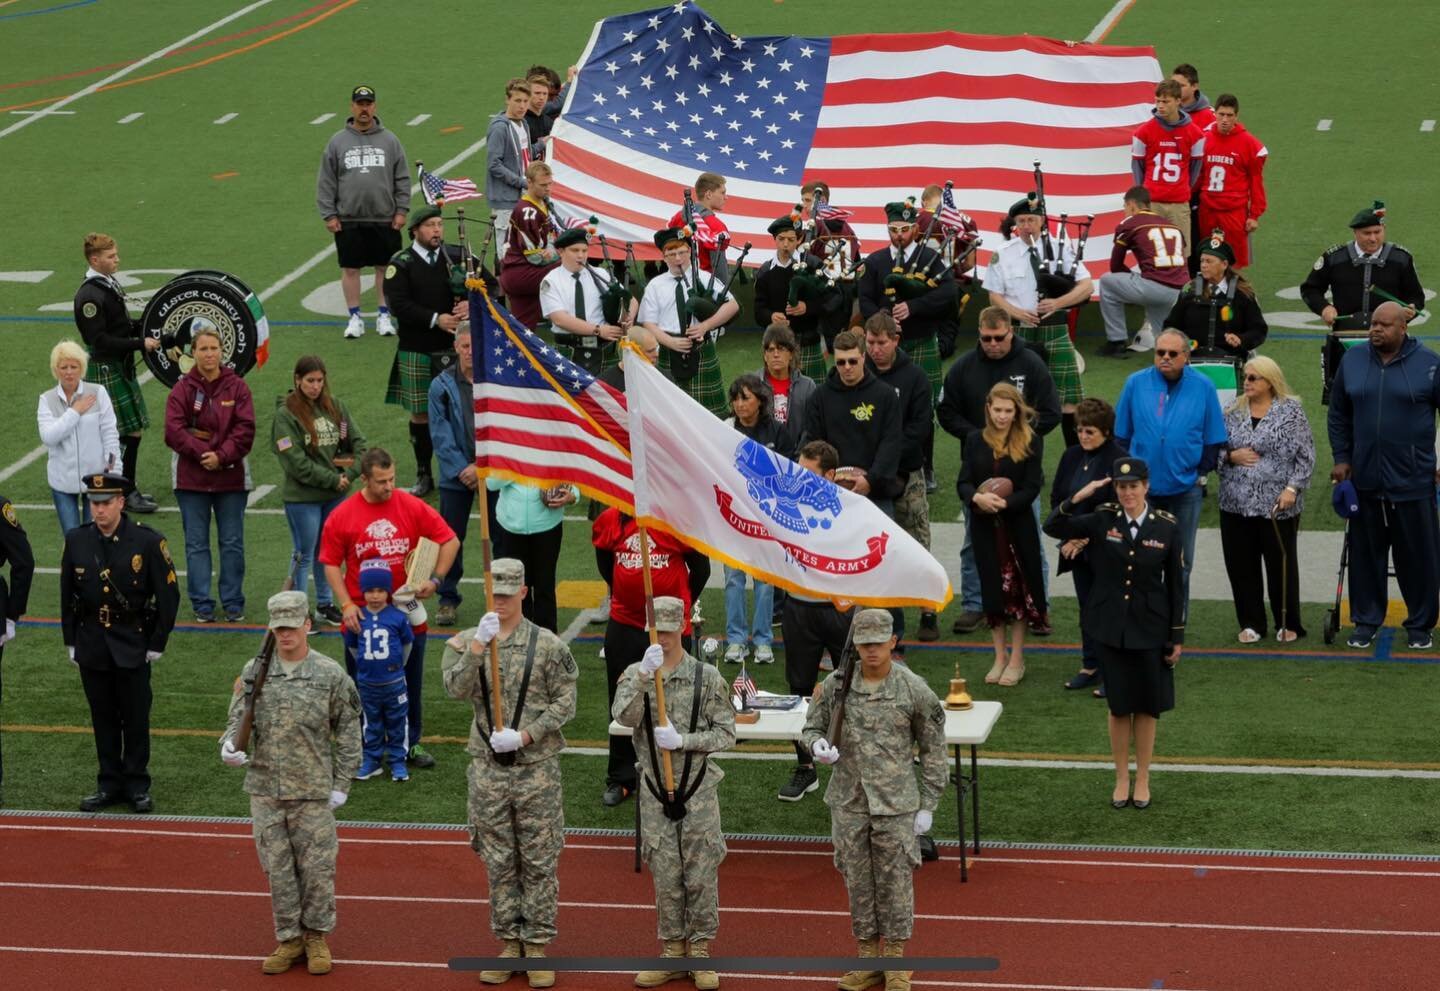 Welcome to the 7th Annual Football Classic and Veterans Appreciation Ceremony. I want to thank everyone who has ever made this event possible. Although virtual this year, we did not want to miss some important recognitions, memories and most of all a